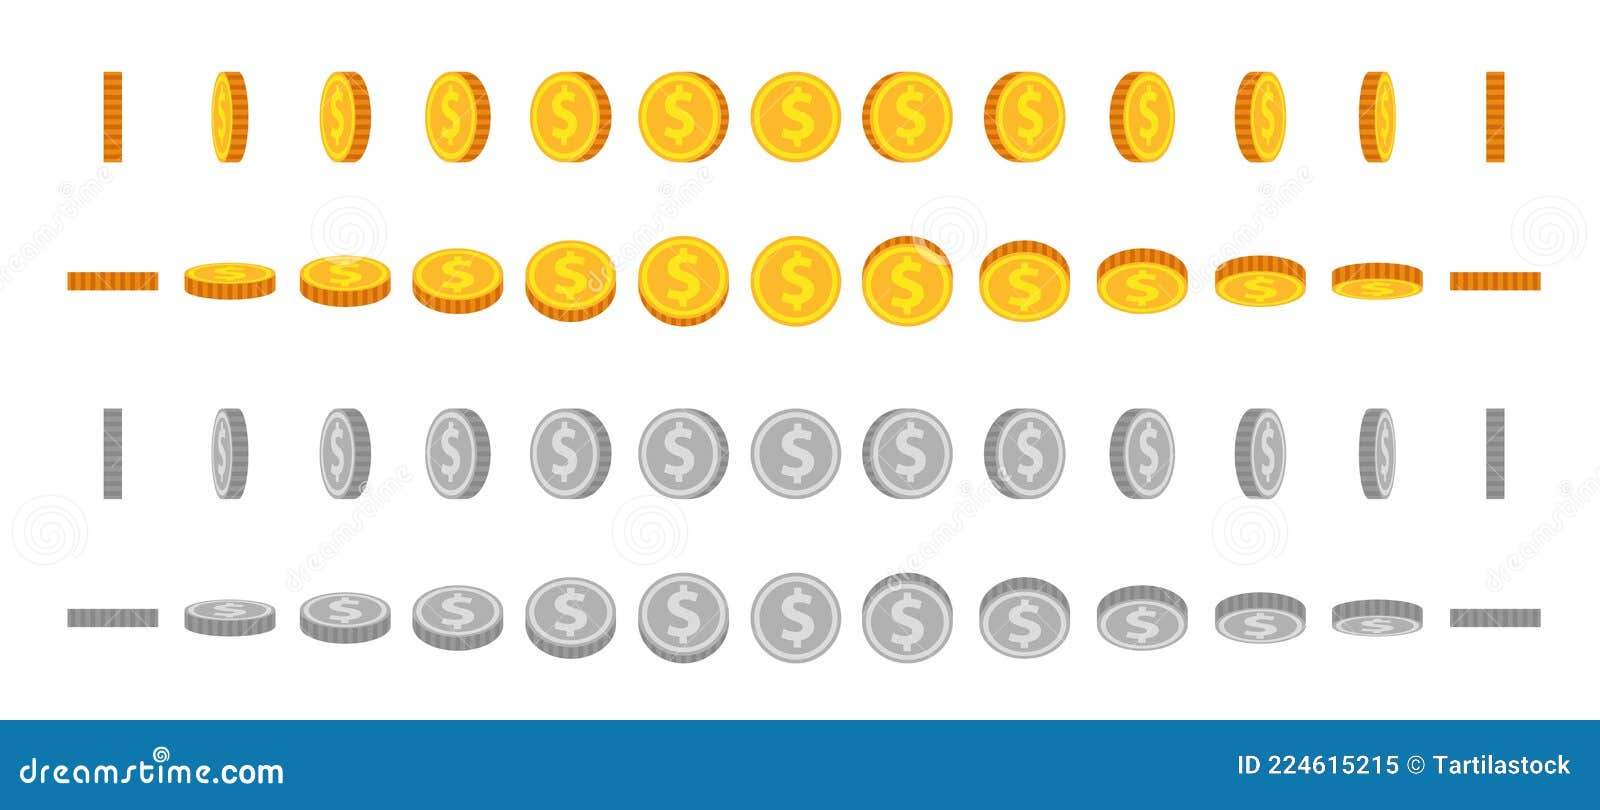 cartoon coin animation sprites. gold and silver coins flip and rotate. round dollar for animated game. money icon in